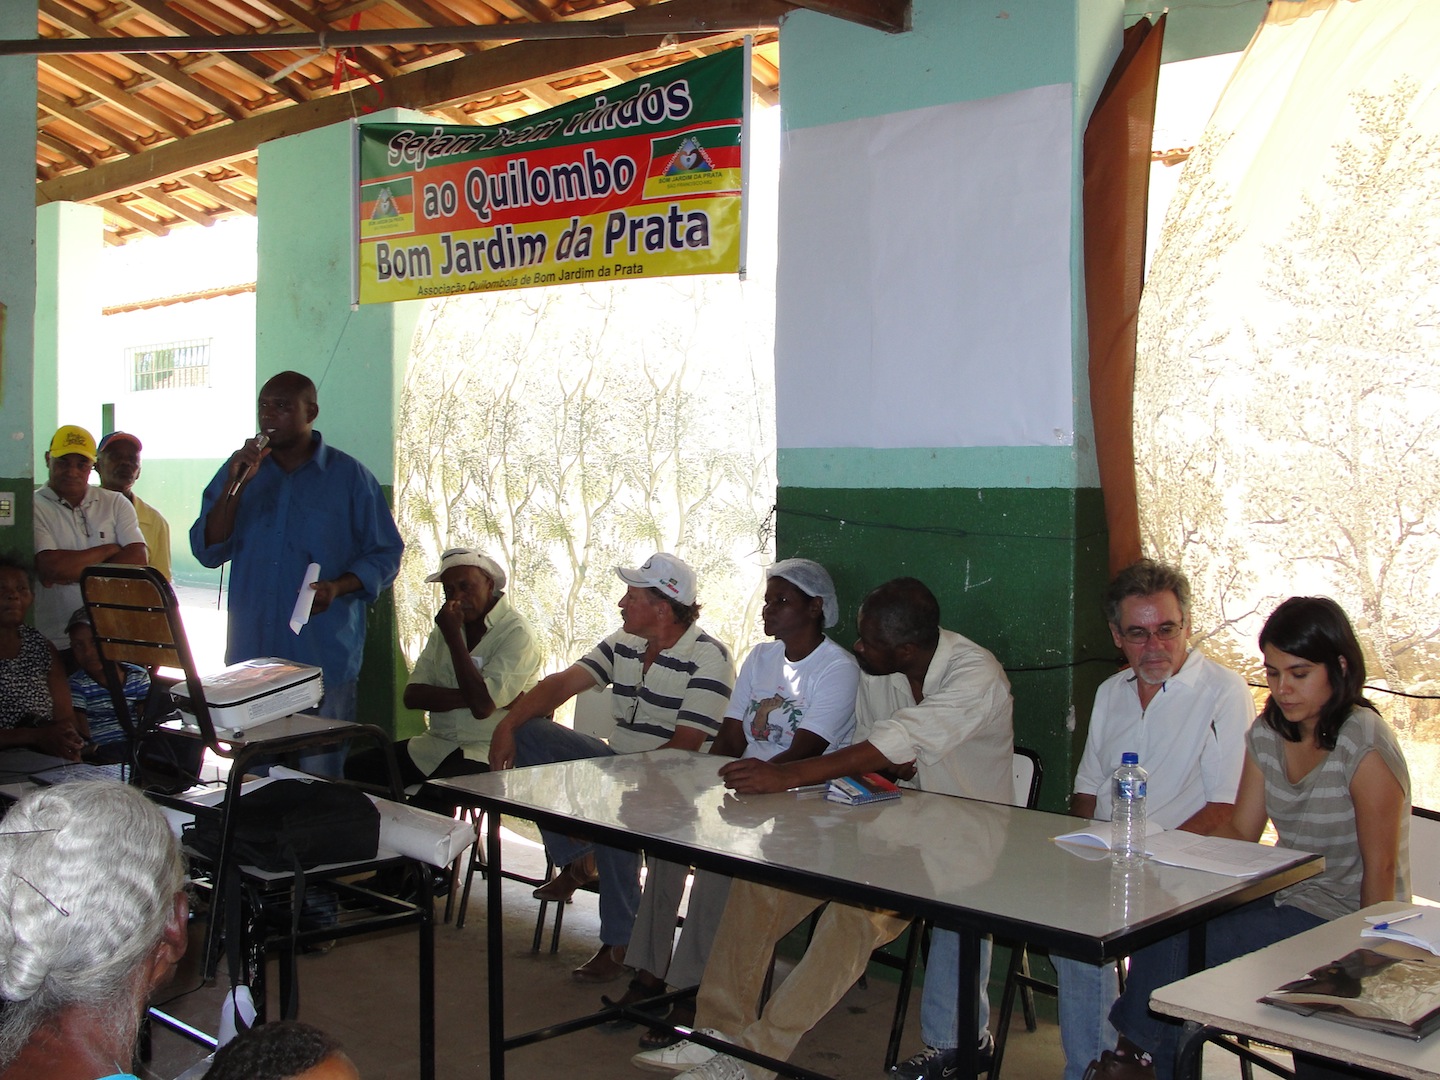 Meeting to approve geographical limits of Quilombo 1